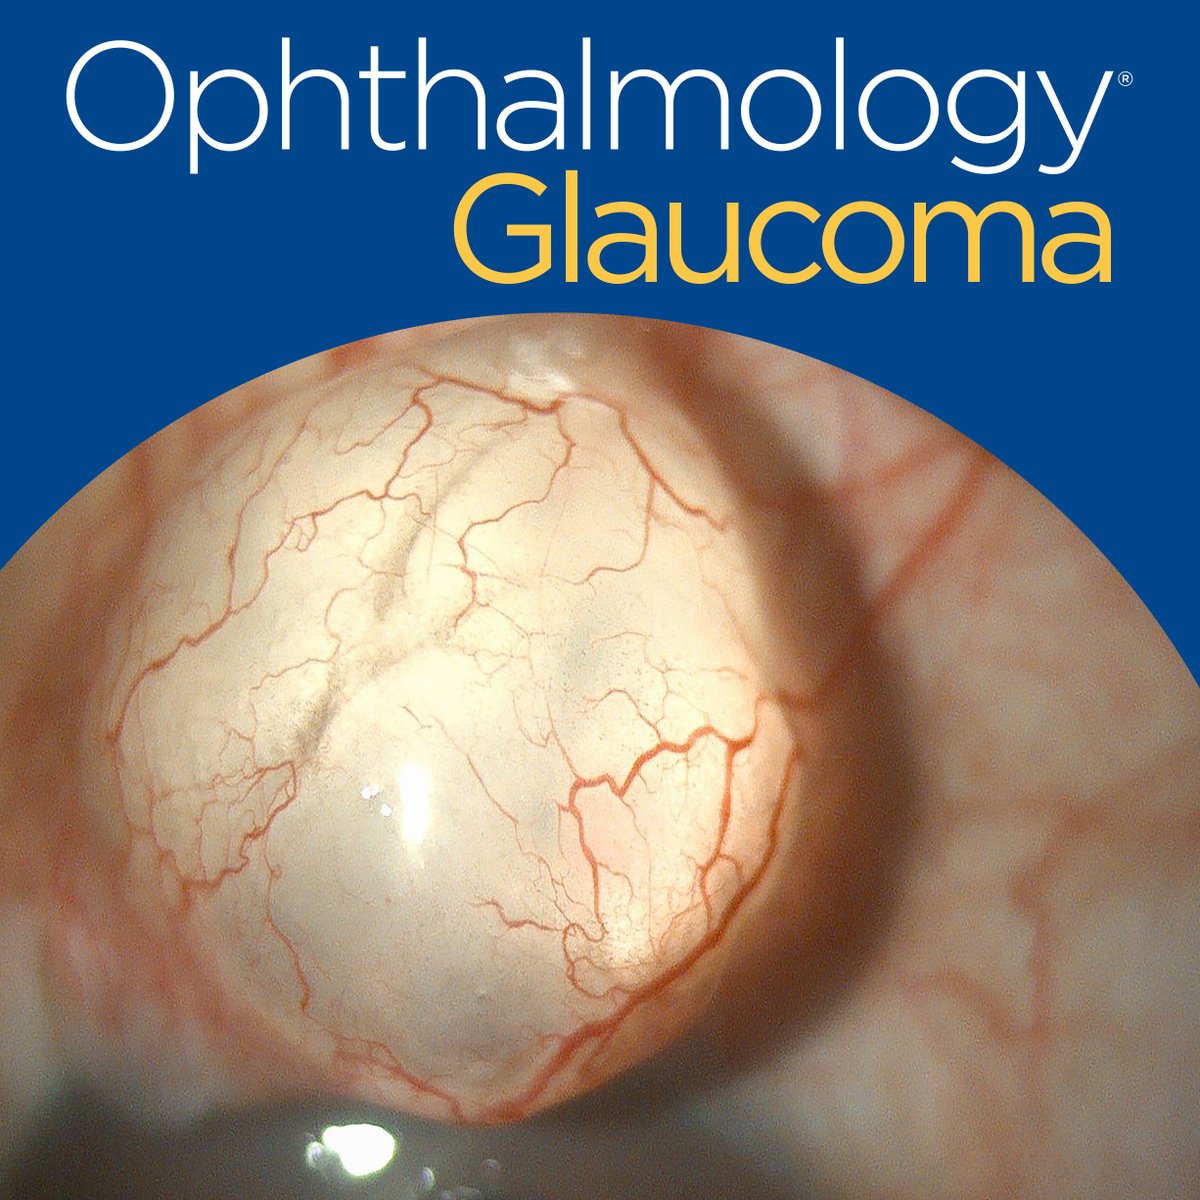 📣Register now for the next Ophthalmology Virtual Journal Club on June 19! Join presenter Nazlee Zebardast, MD, and moderator @DrLorraineEyeMD for a discussion of “Optimal Performance of Selective Laser Trabeculoplasty.” ow.ly/9Wrm50R9jQ3 #Ophthalmology #Glaucoma